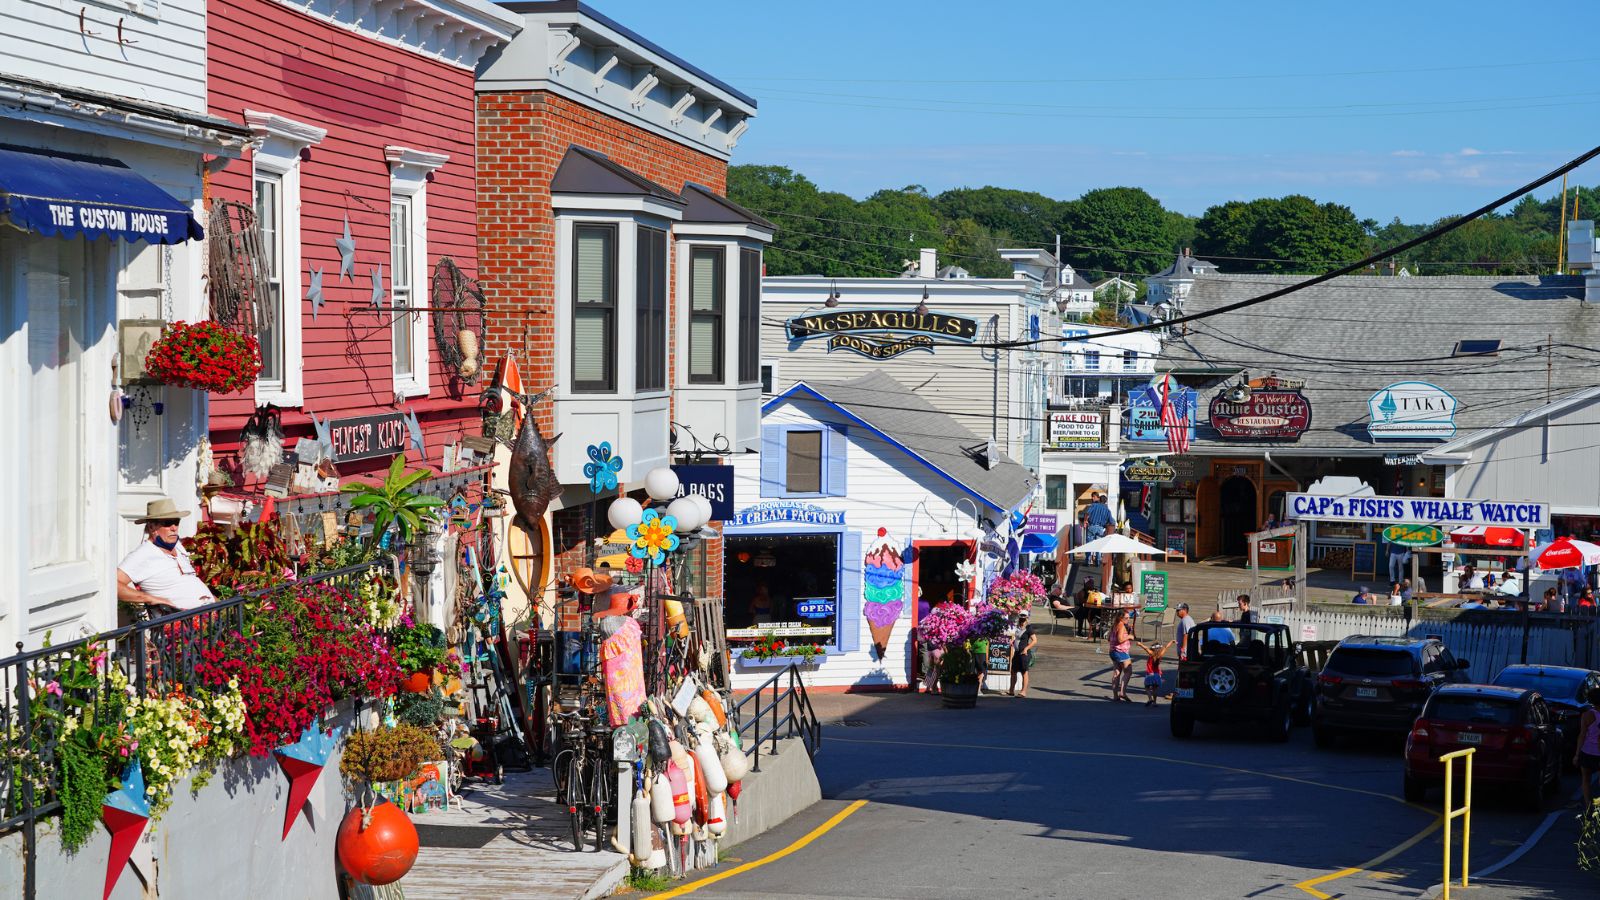 <p>Hidden in an inlet between Maine’s many peninsulas, Boothbay Harbor is a classic seaside town. An hour north of Portland, the hillside town is all about boats—don’t leave without going on at least one tour.</p><p>One of the town’s most worthwhile attractions is Boothbay Lobster Wharf. You can dine on super fresh seafood as lobster fisherman unload their daily catch at the working lobster dock.</p>